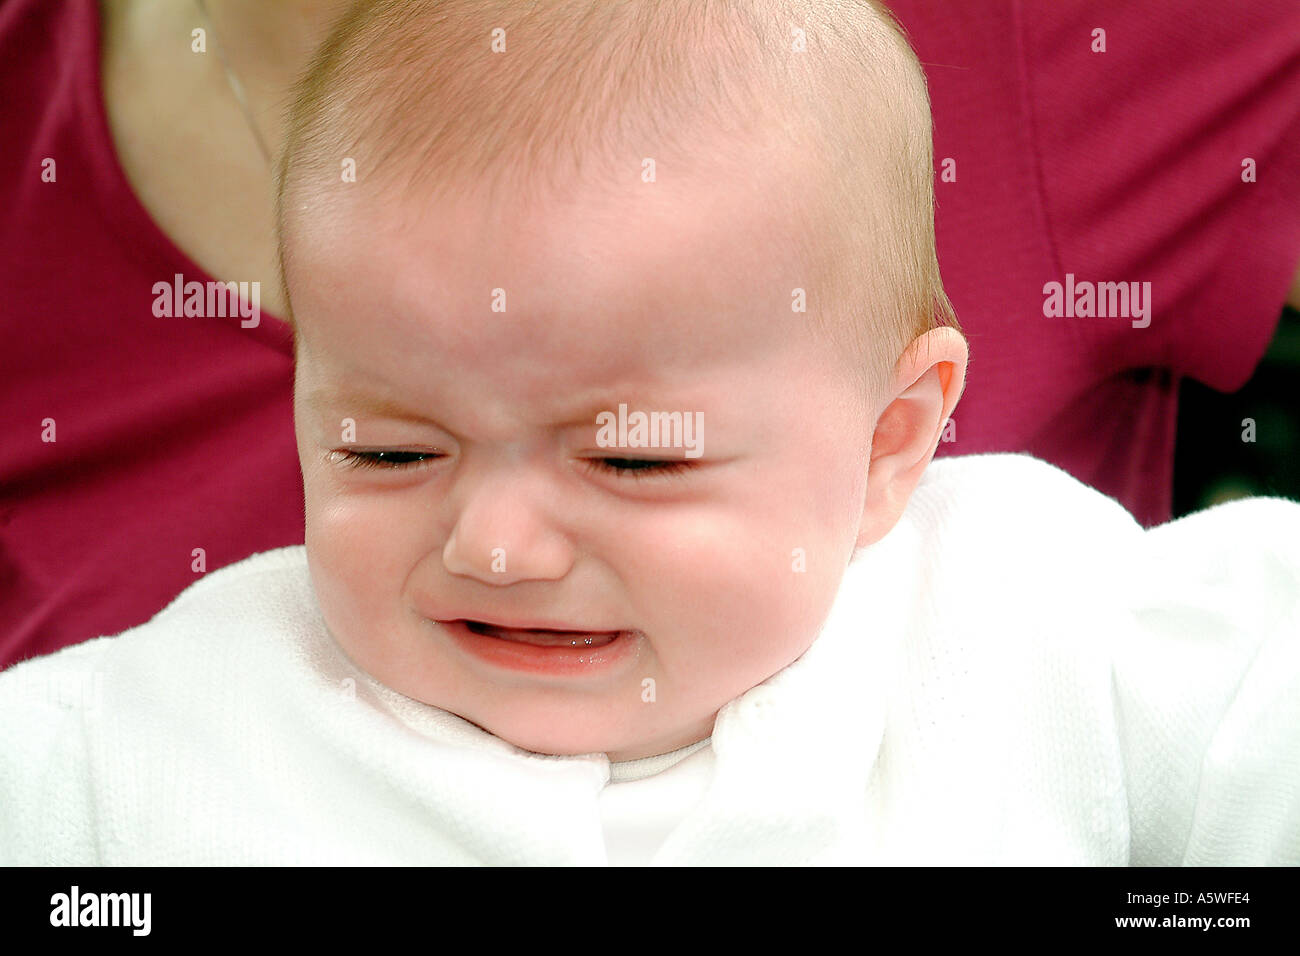 A 5-month old baby girl crying. Stock Photo